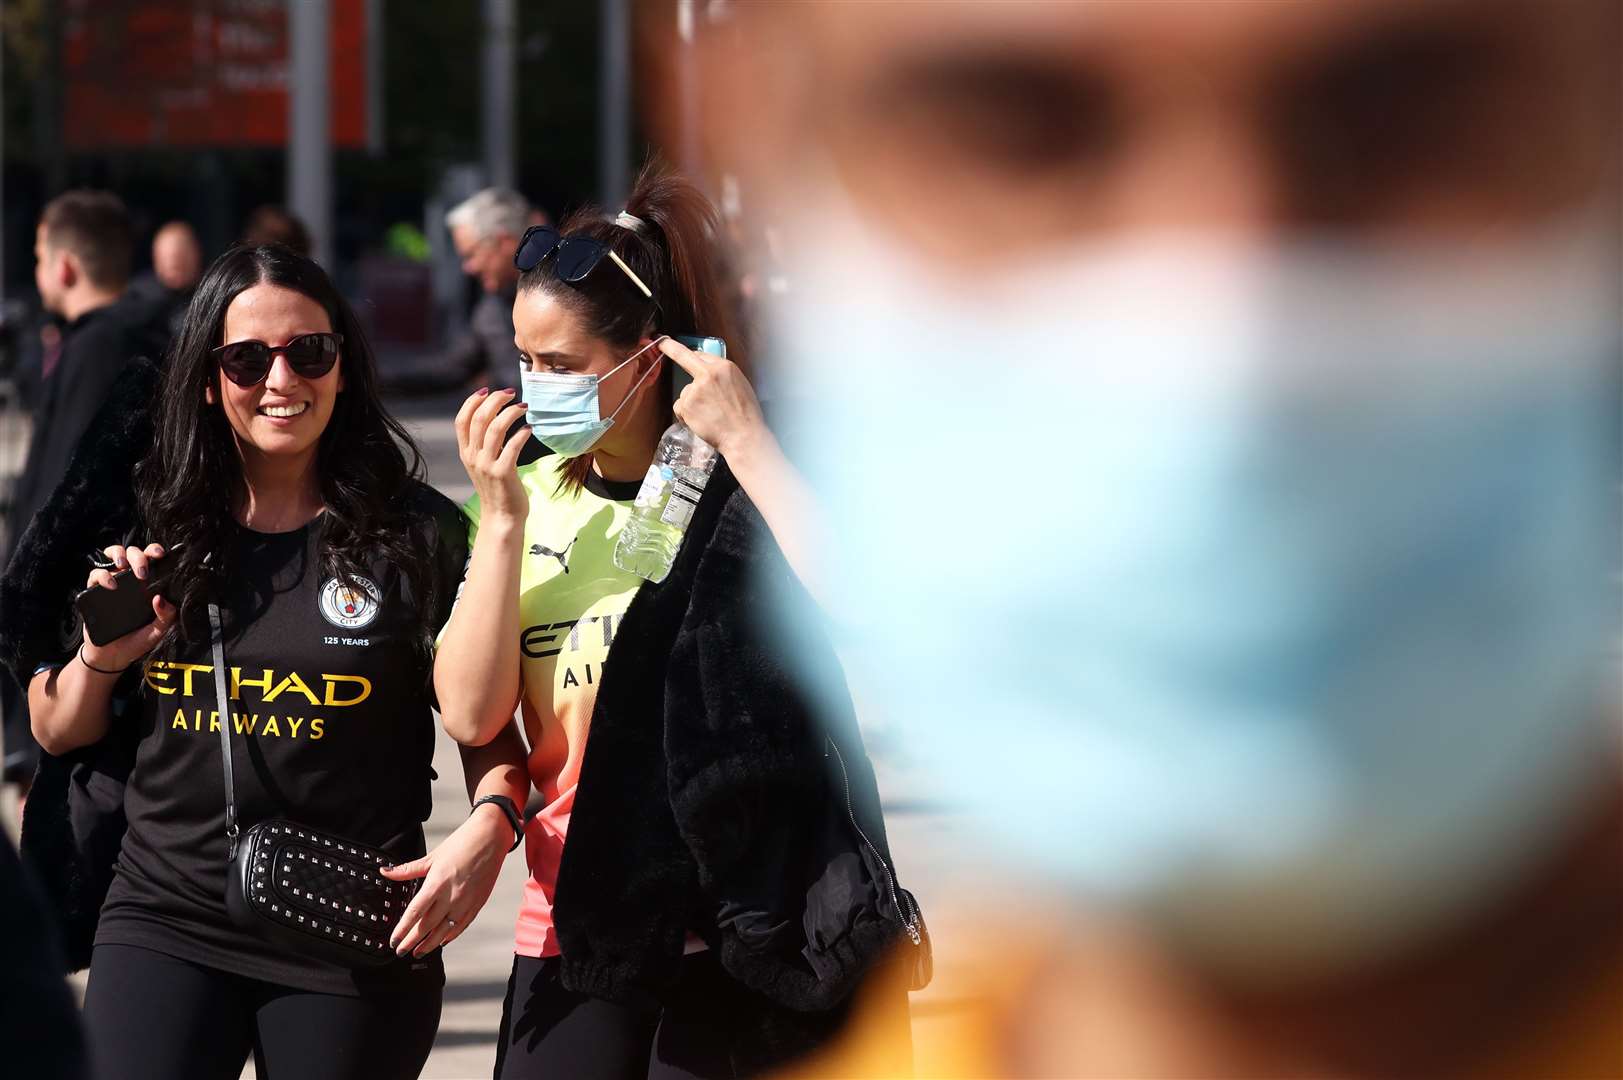 Mask wearing in public settings is expected to no longer be legally enforced after July 19 (Gareth Fuller/PA)